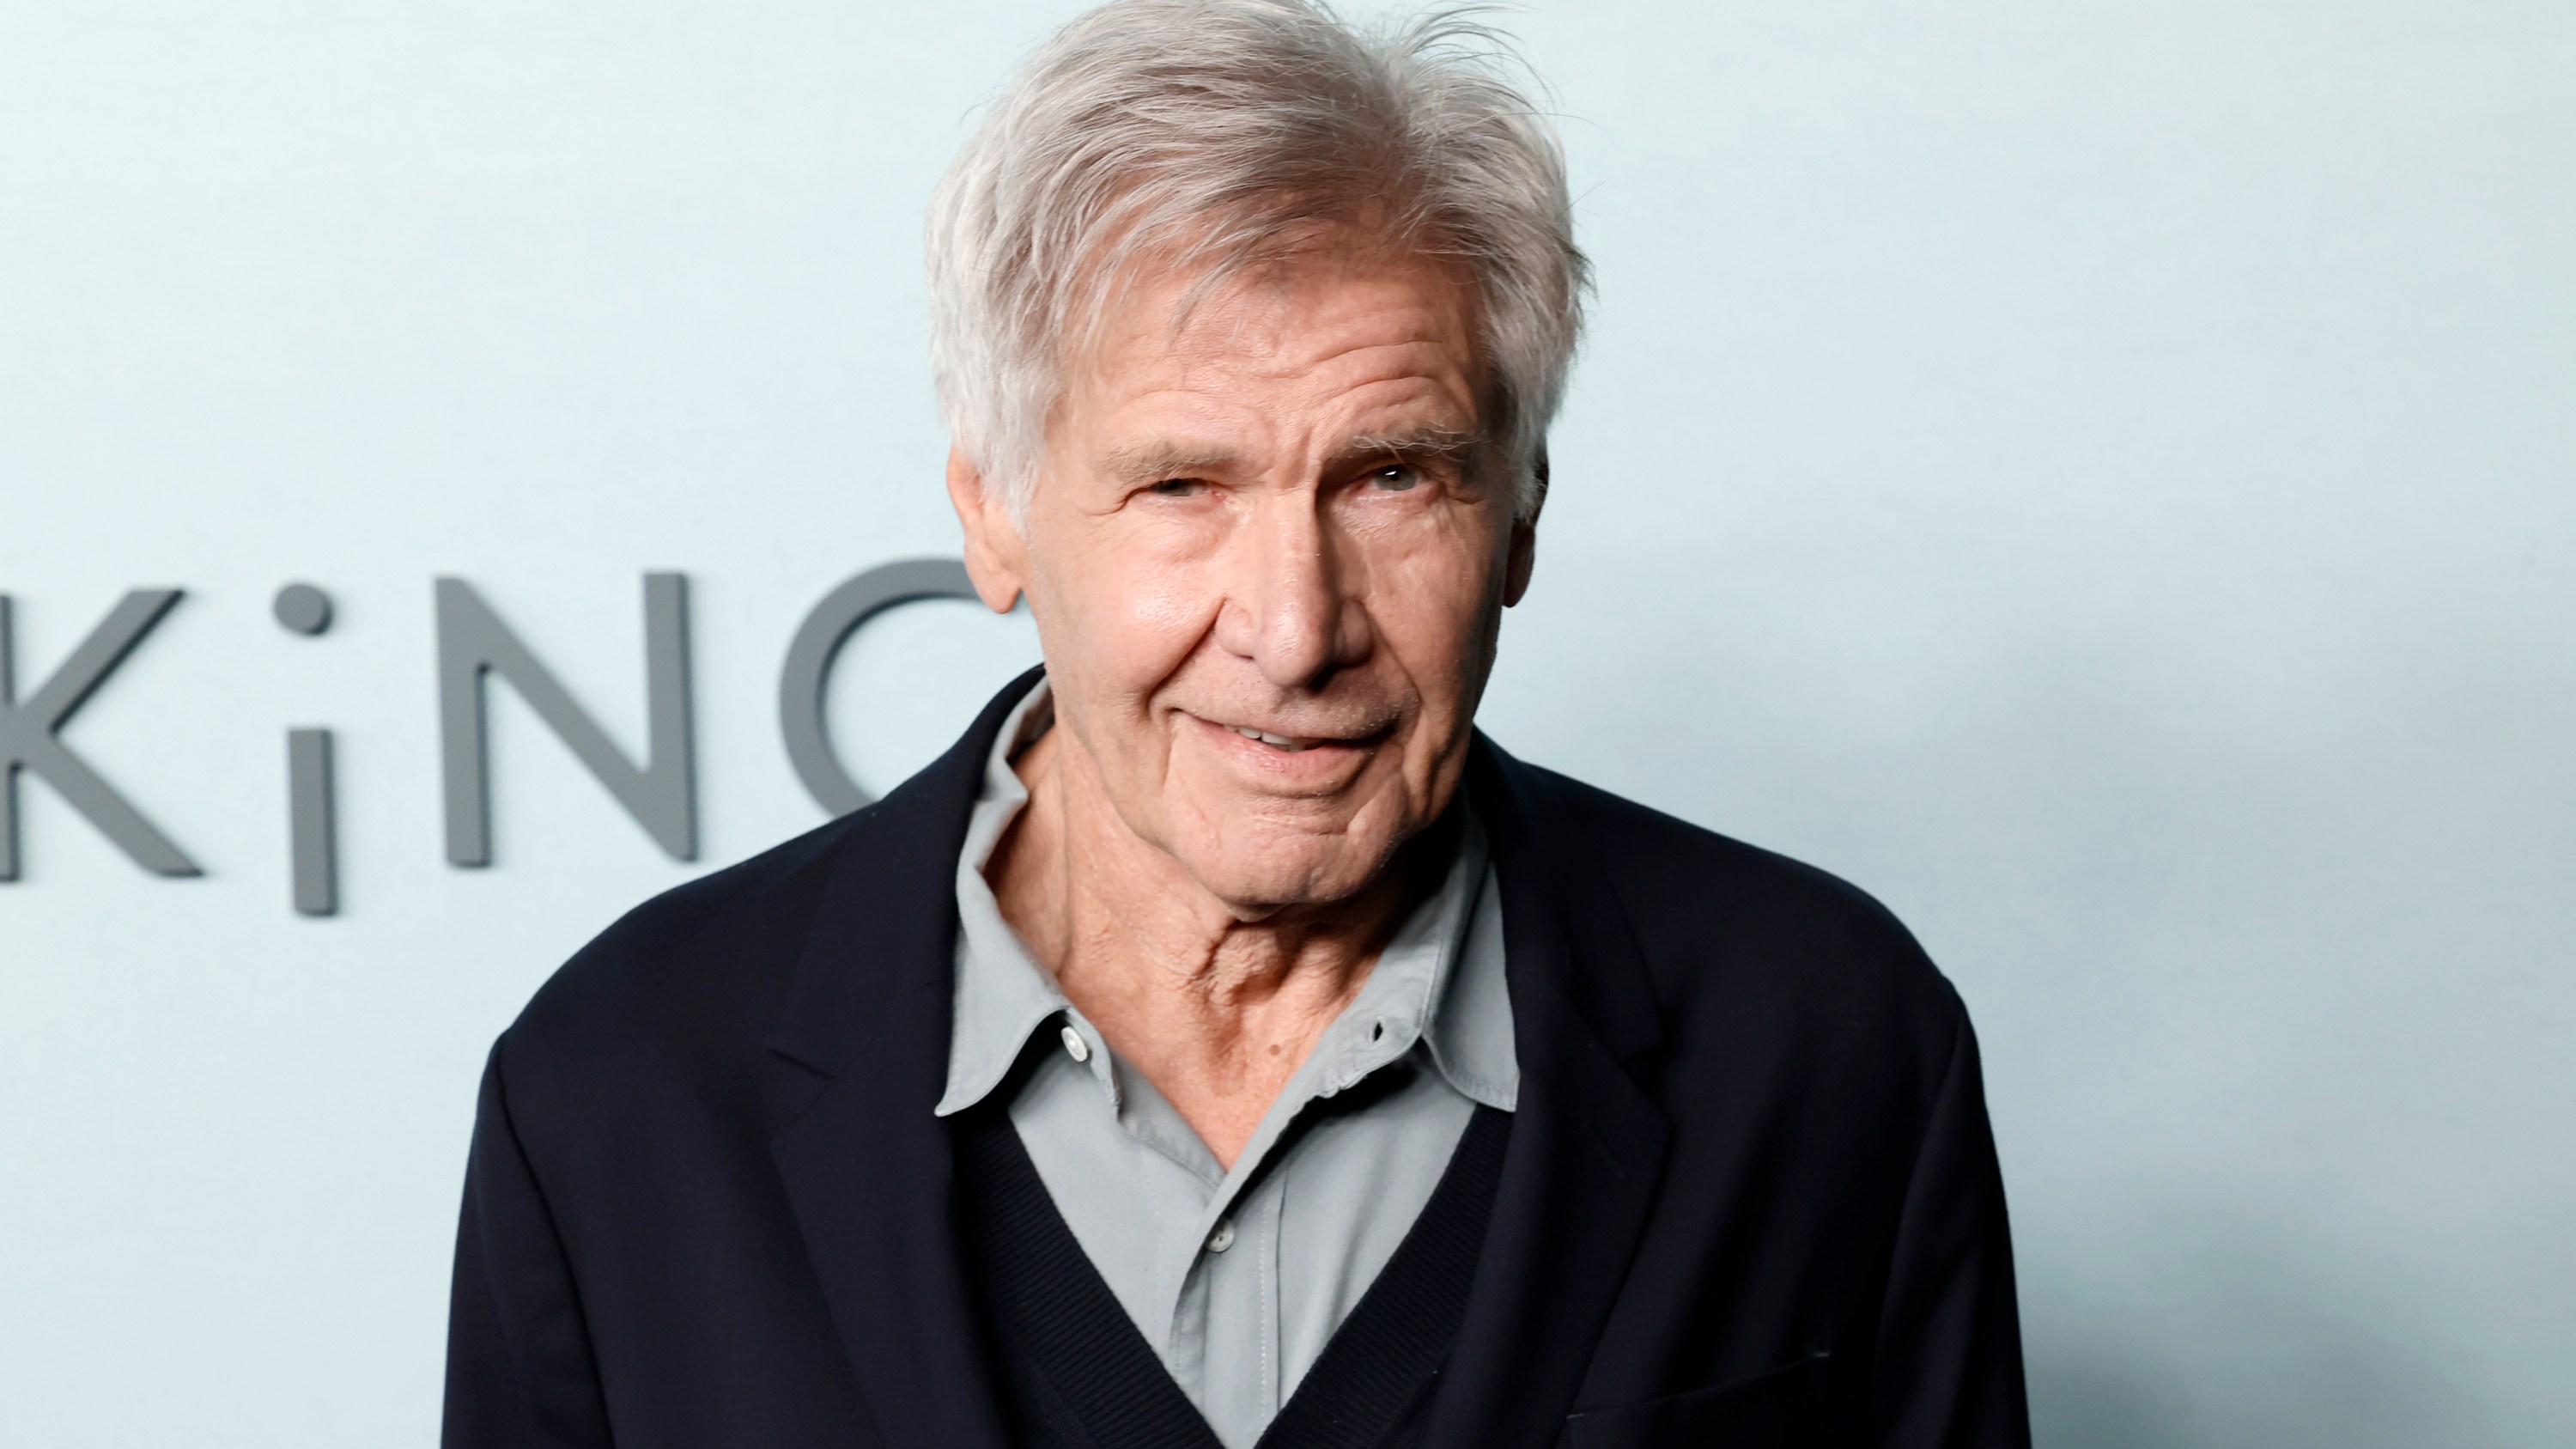 LOS ANGELES, CALIFORNIA - JANUARY 26: Harrison Ford attends the premiere of Apple TV+'s "Shrinking" at Directors Guild Of America on January 26, 2023 in Los Angeles, California. (Photo by Emma McIntyre/Getty Images)